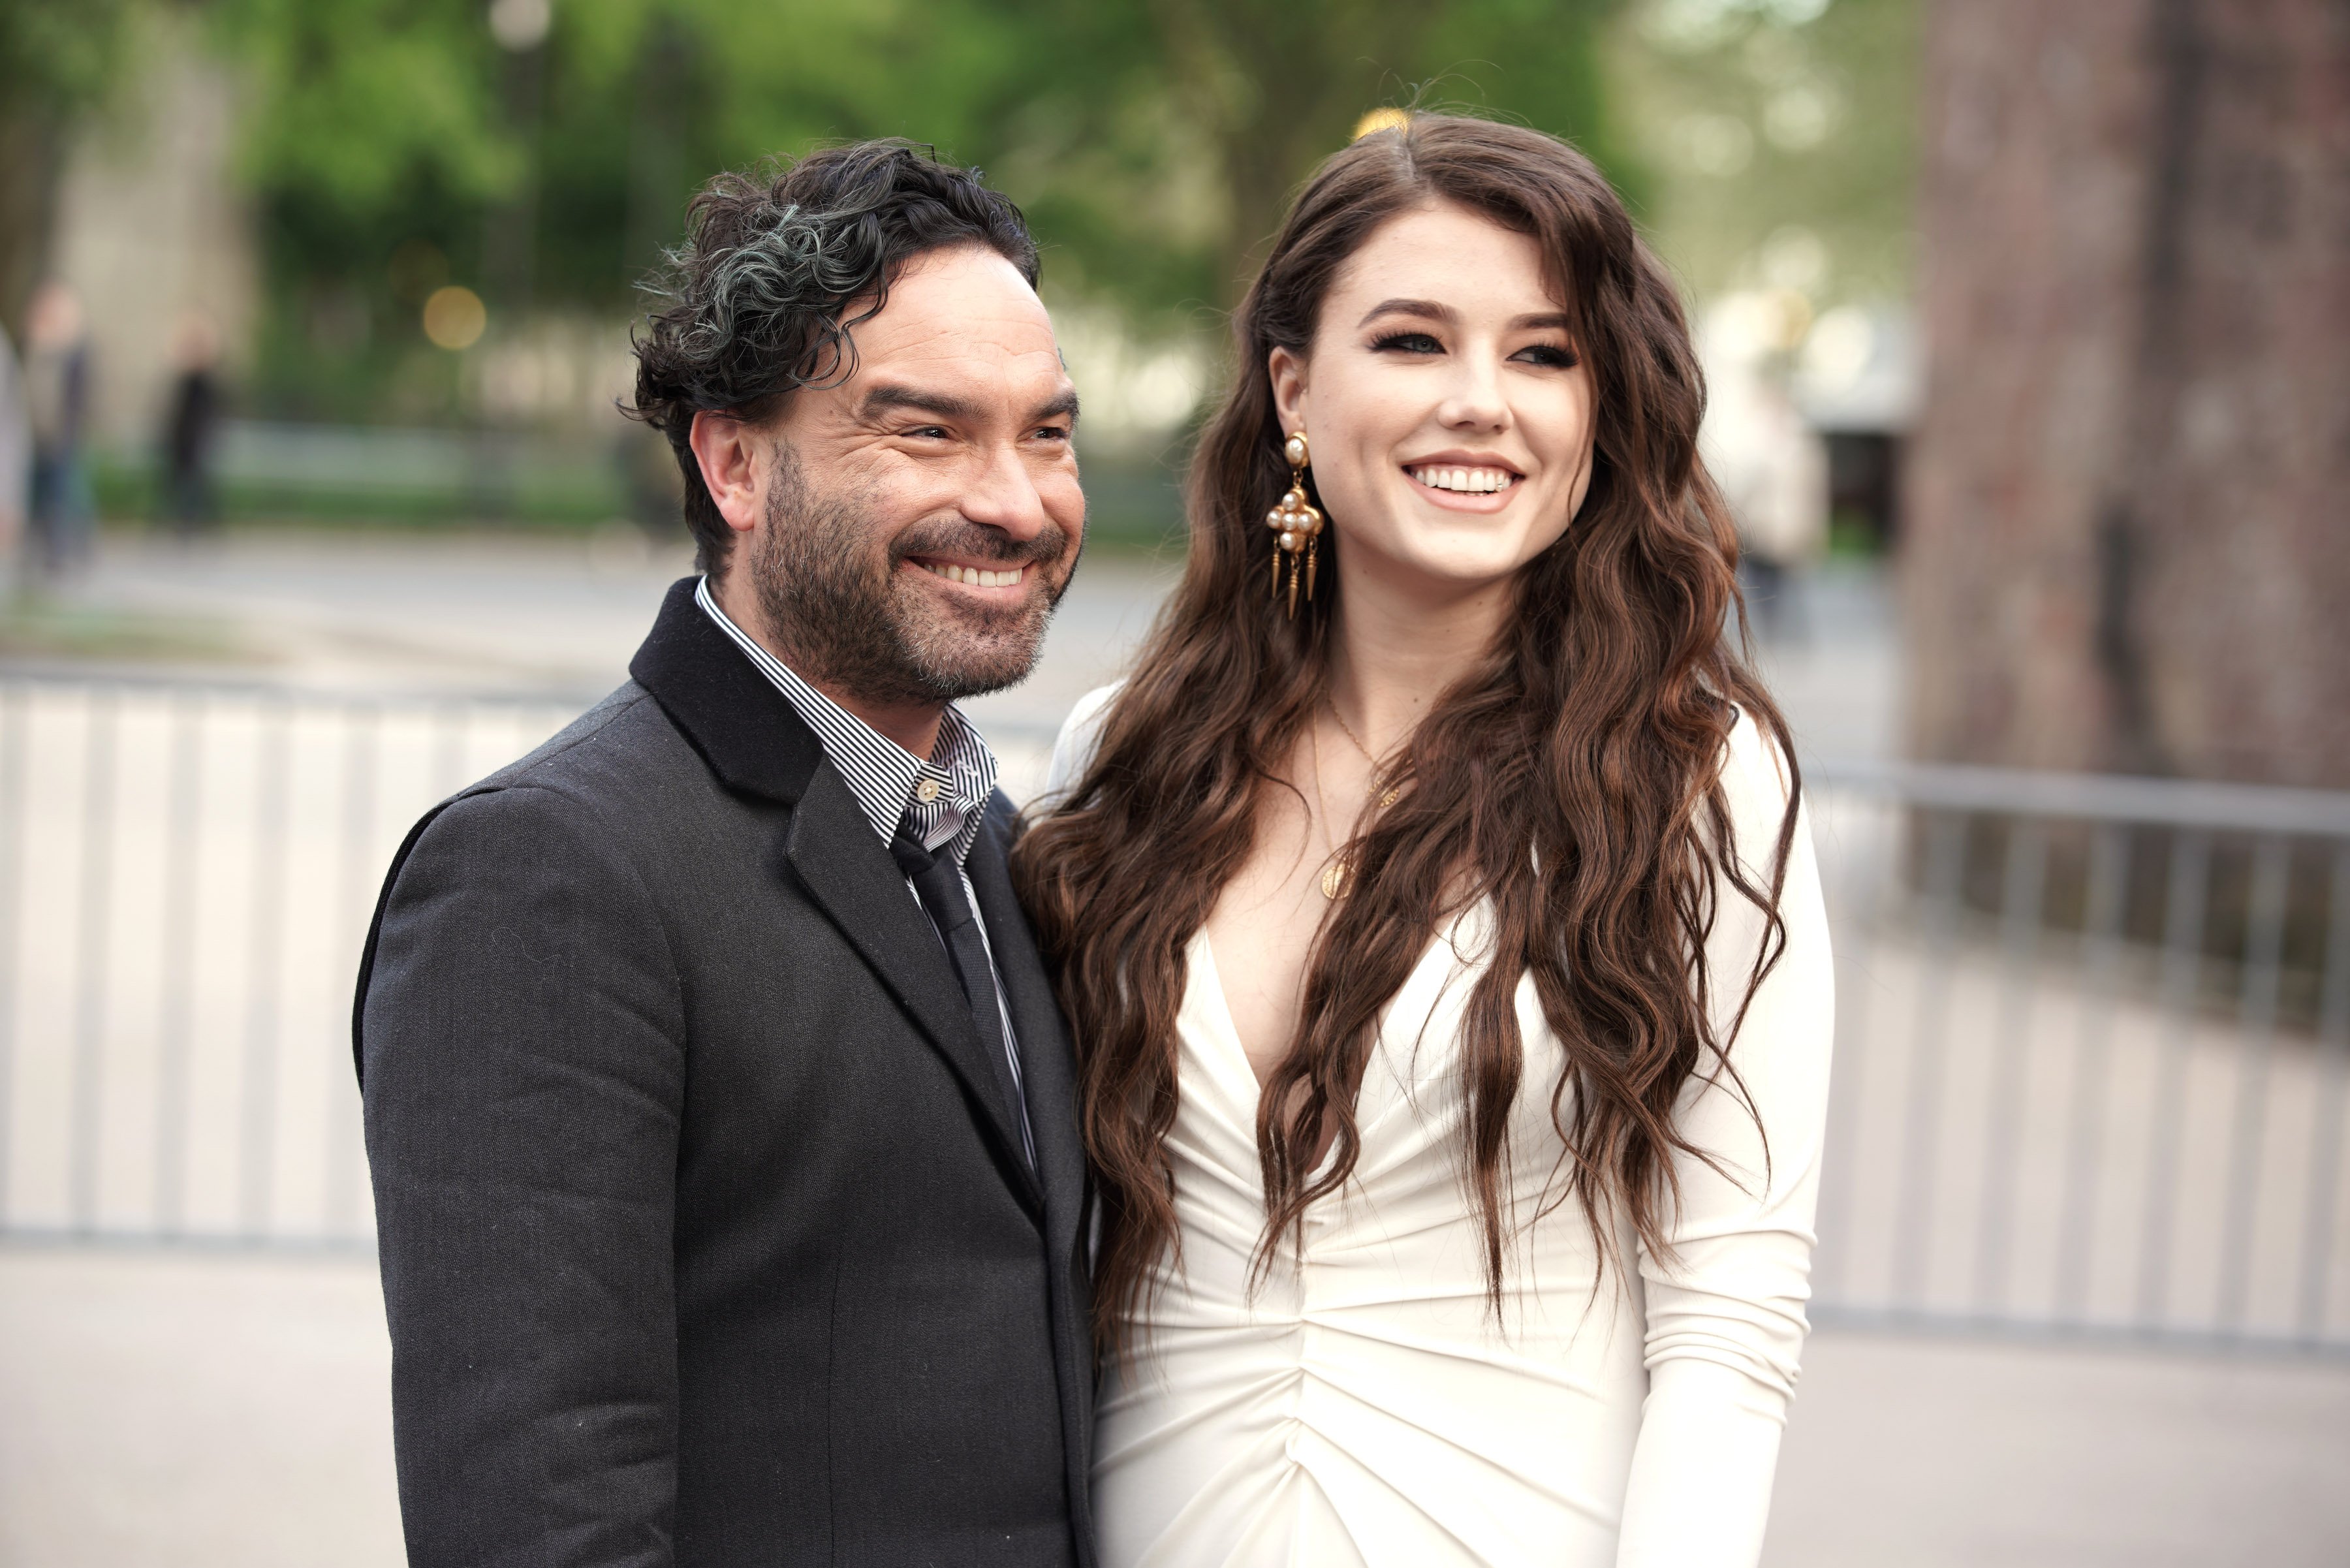 ohnny Galecki and Alaina Meyer arrive at the Statue Of Liberty Museum Opening Celebration at Battery Park on May 15, 2019 in New York City. | Source: Getty Images